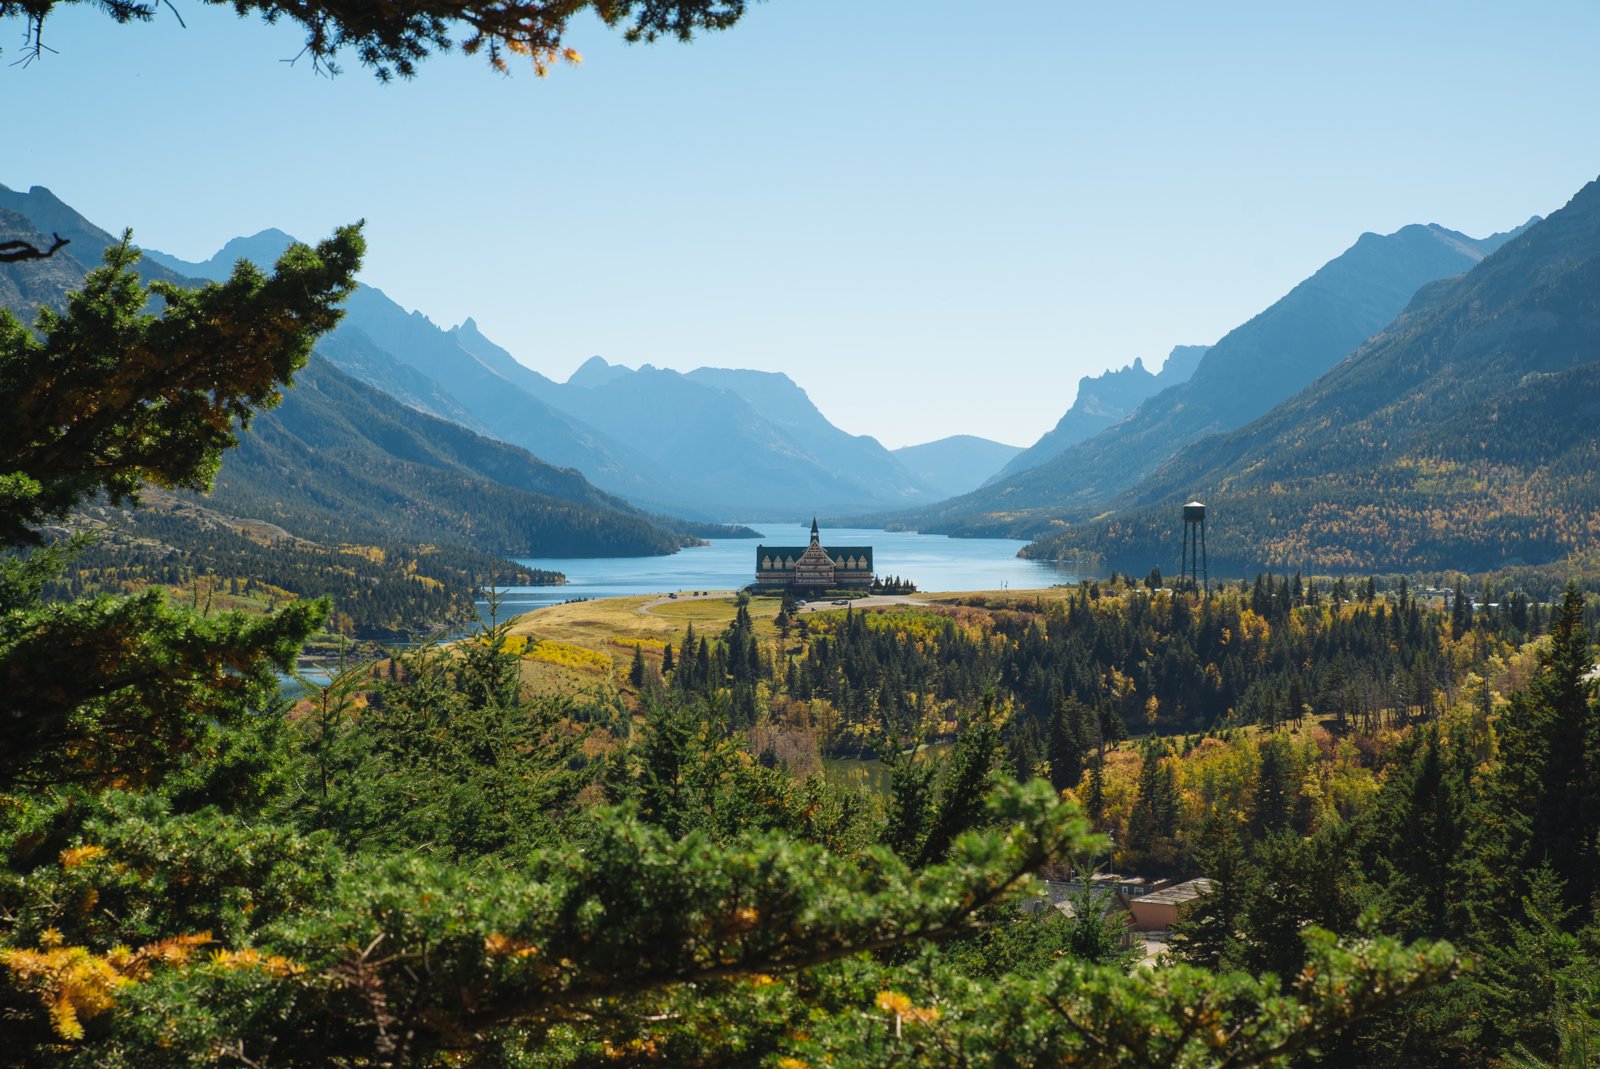 Scenic view of the Prince of Wales Hotel surrounded by forest and mountains in Waterton Lakes National Park.